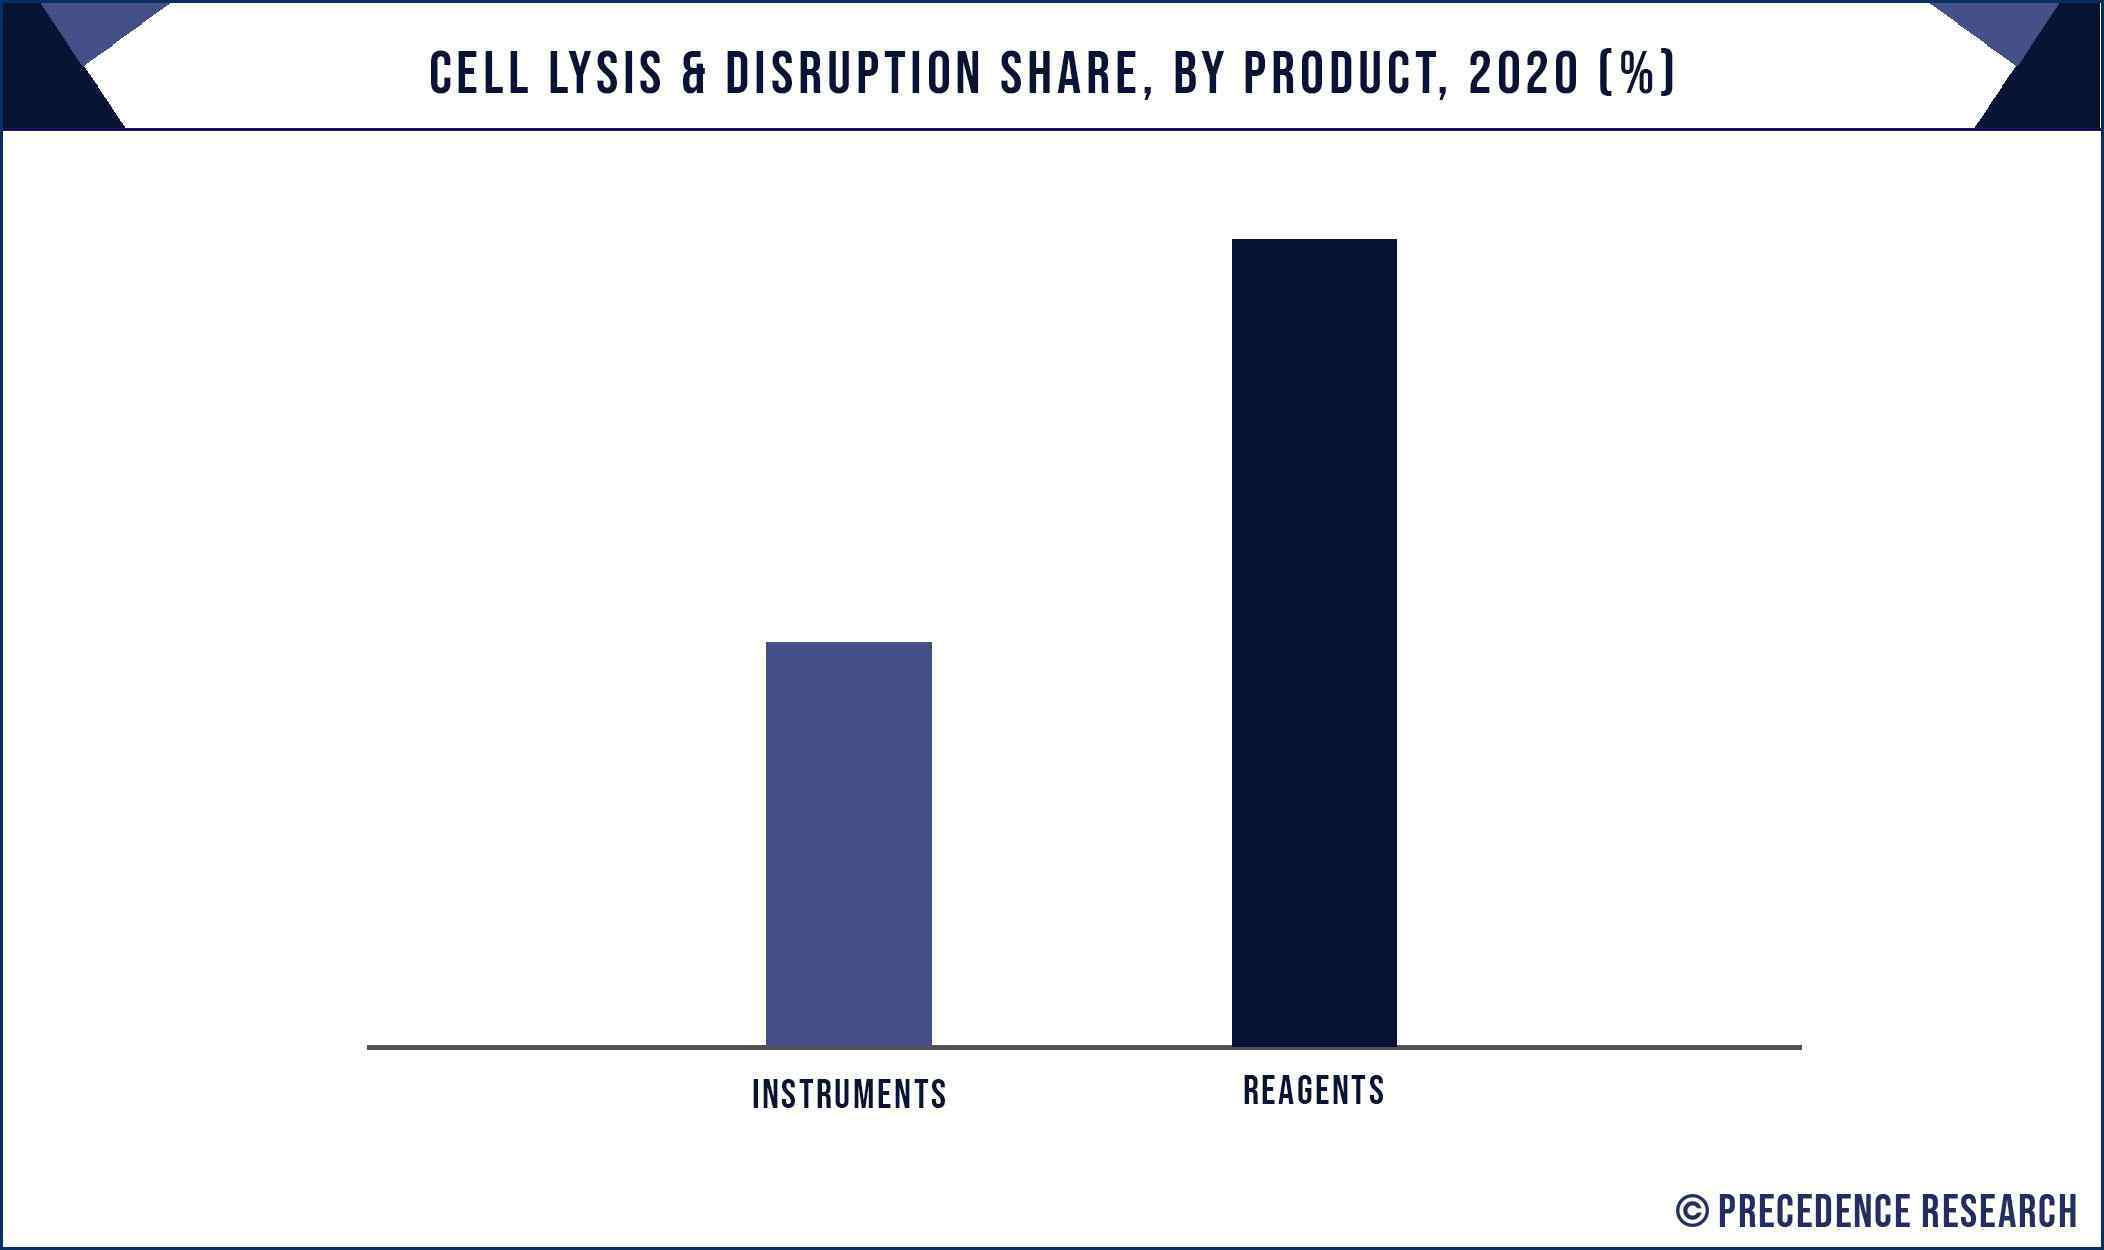 Cell Lysis & Disruption Market Share, By Product, 2020 (%)